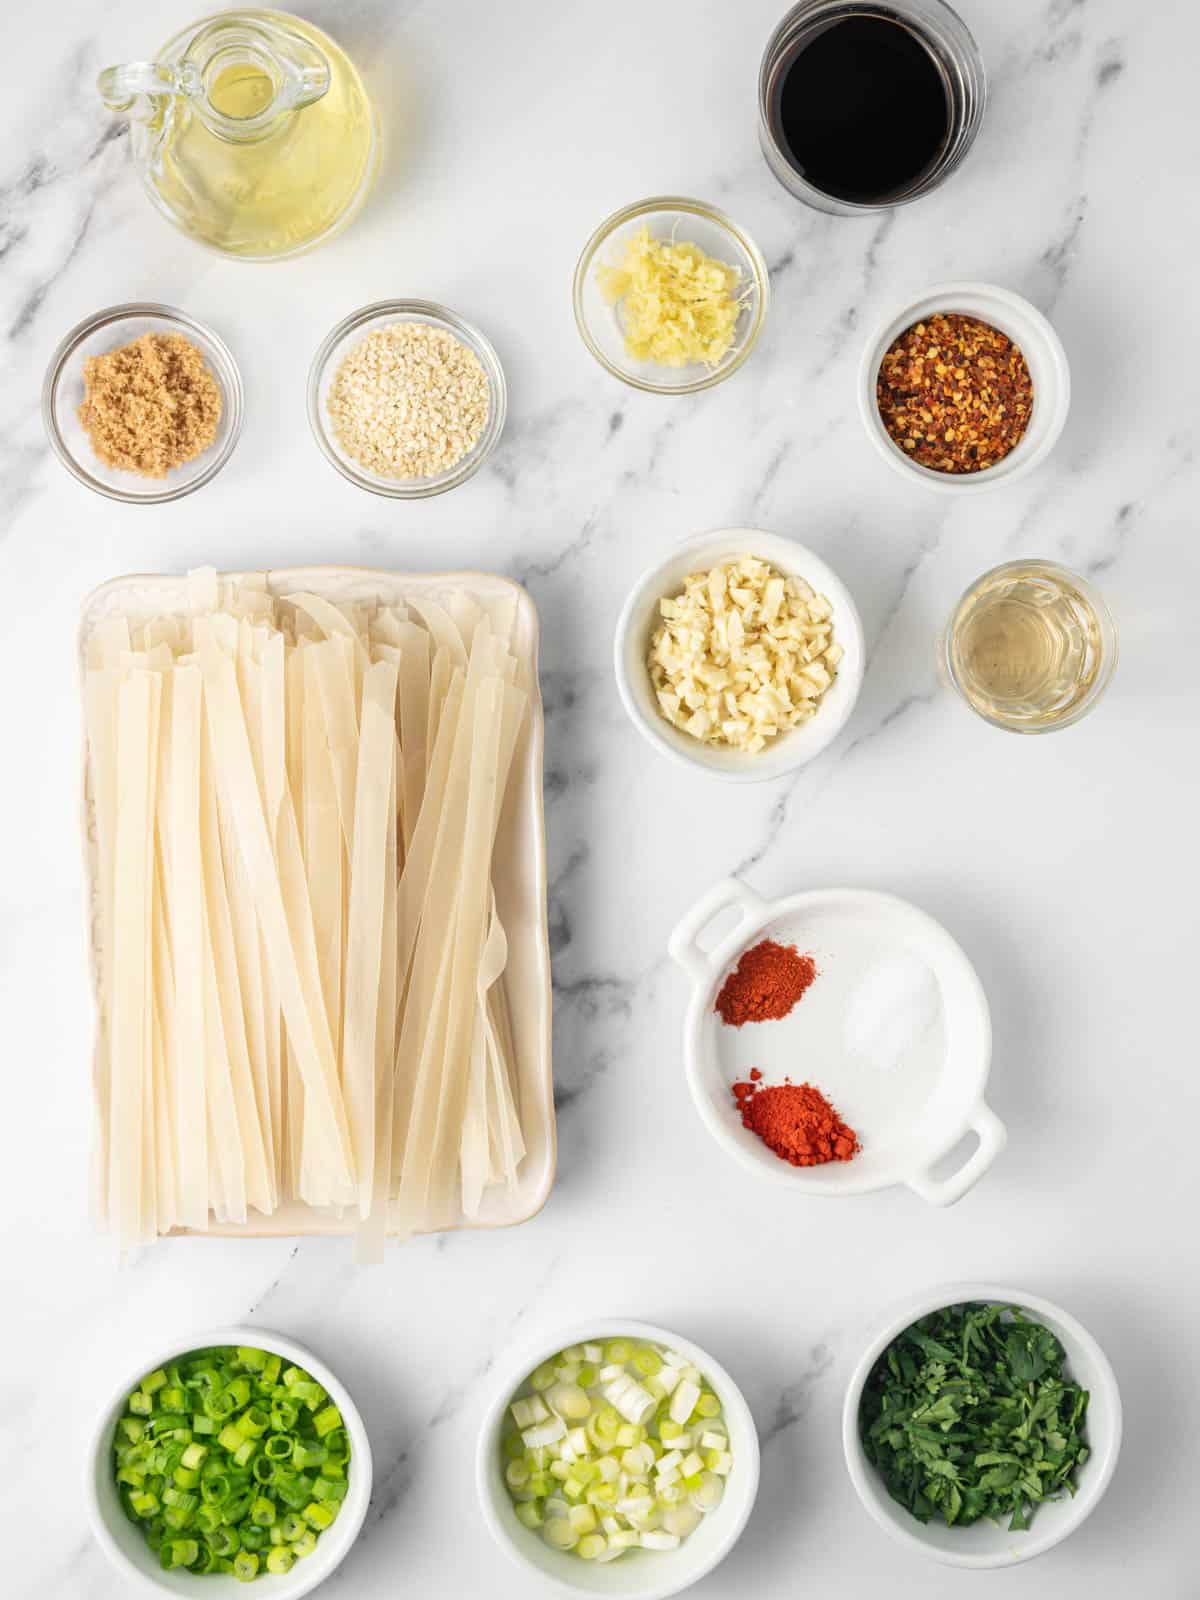 Ingredients needed for chili garlic oil noodles.